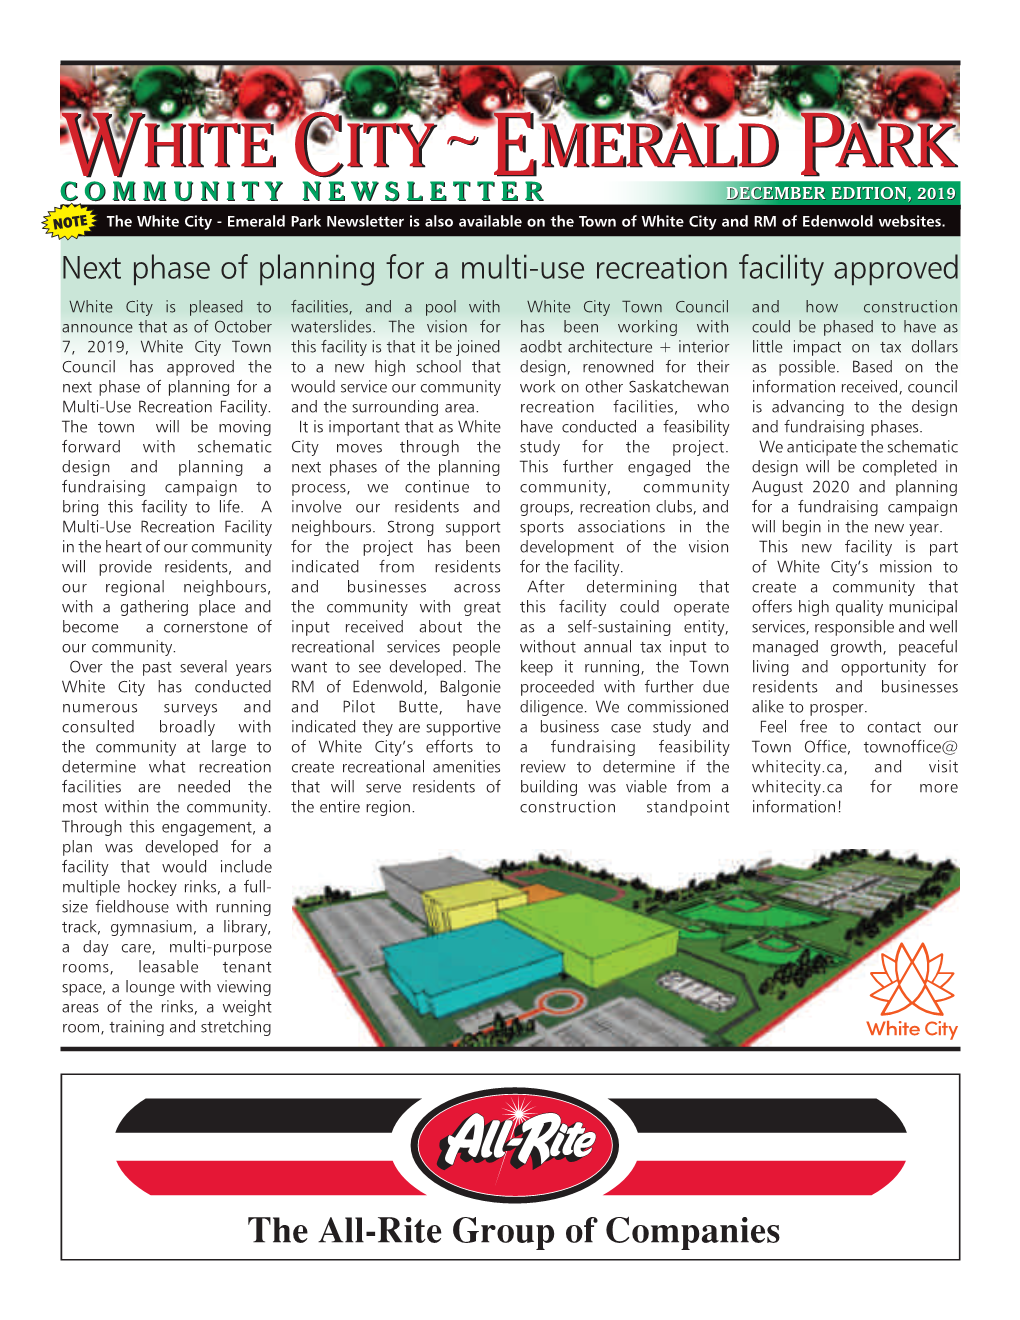 DECEMBER EDITION, 2019 NOTE the White City - Emerald Park Newsletter Is Also Available on the Town of White City and RM of Edenwold Websites